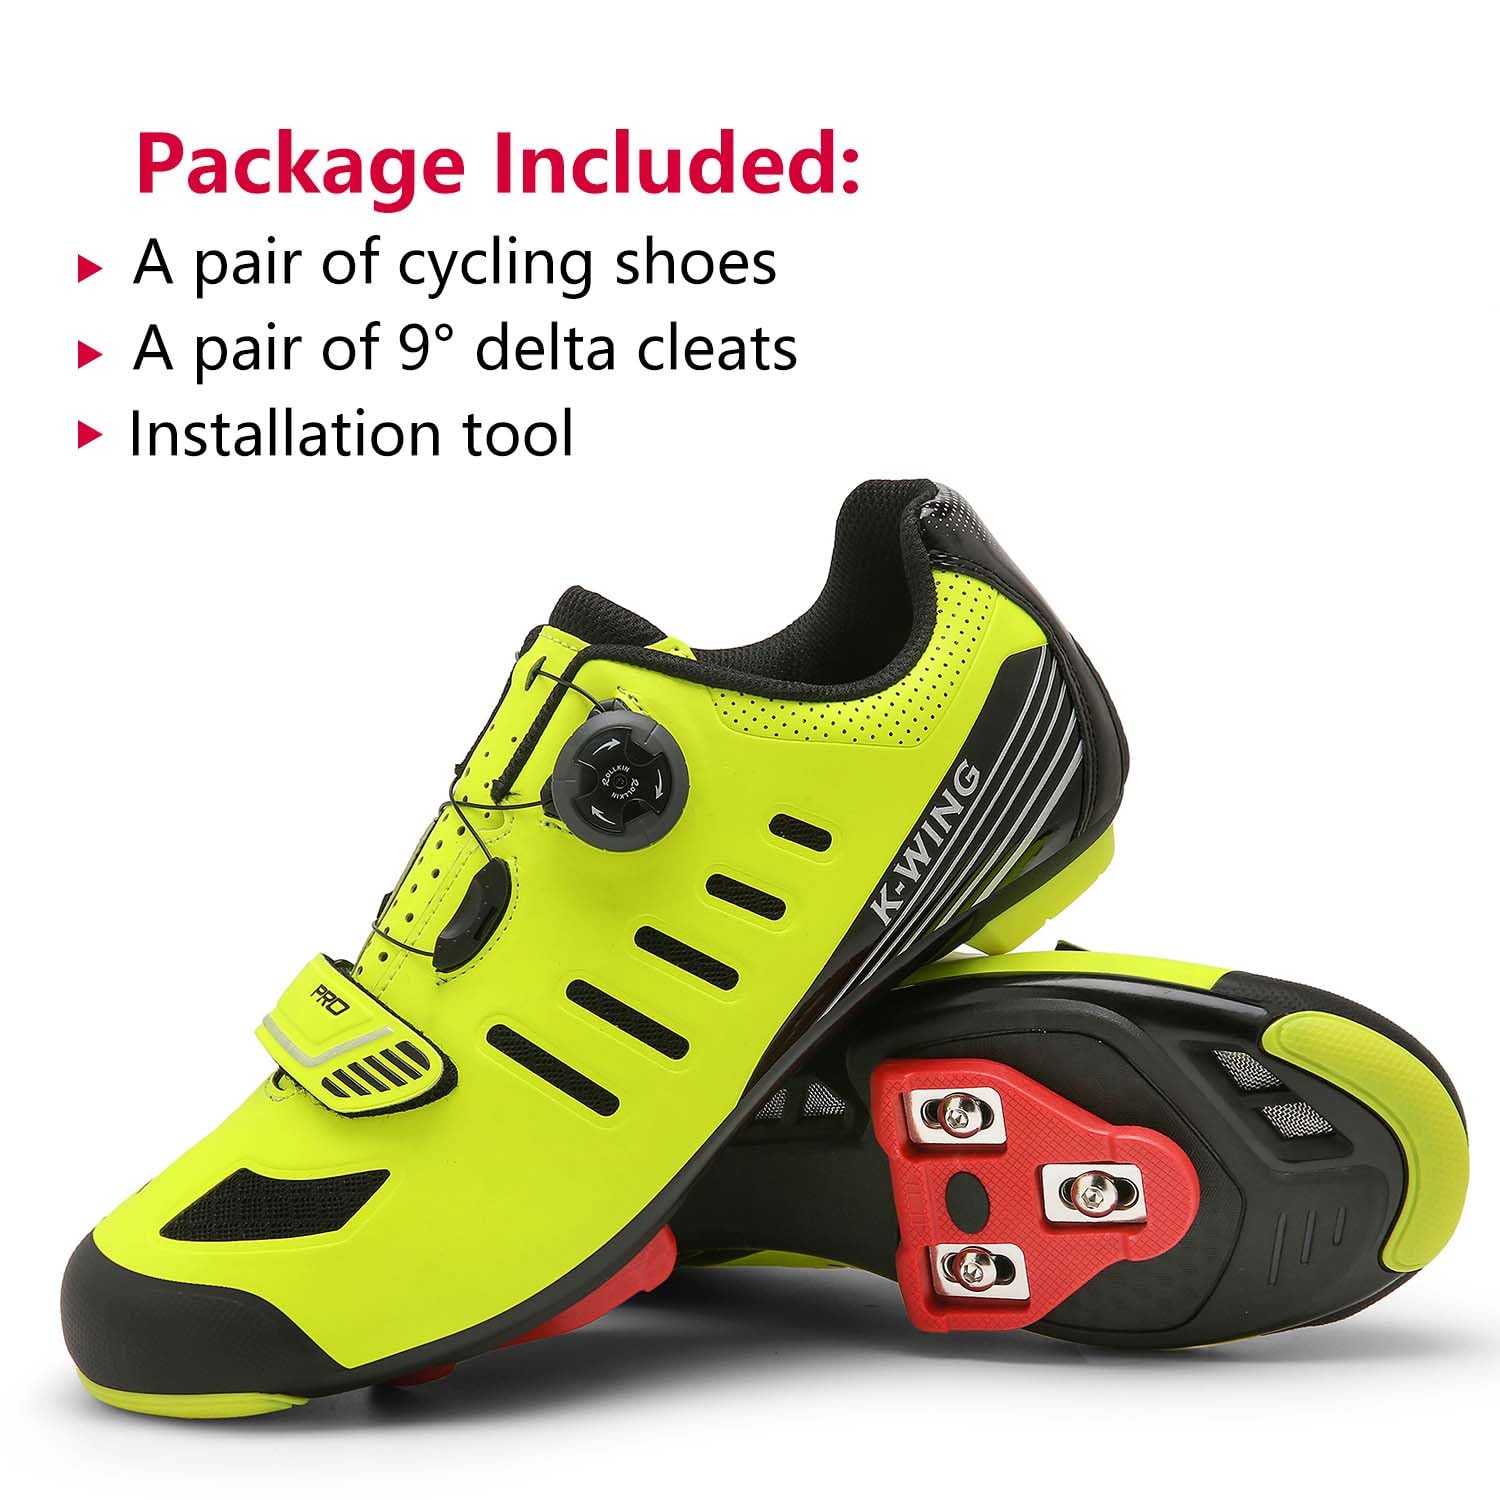 kushike Road Bike Cycling Shoes Compatible with Peloton Shimano SPD Bike Riding Shoes for Men's and Women,Indoor Cycling Shoes Women,Spinning Shoes for Women Indoor cycling-12-2106Ayellow